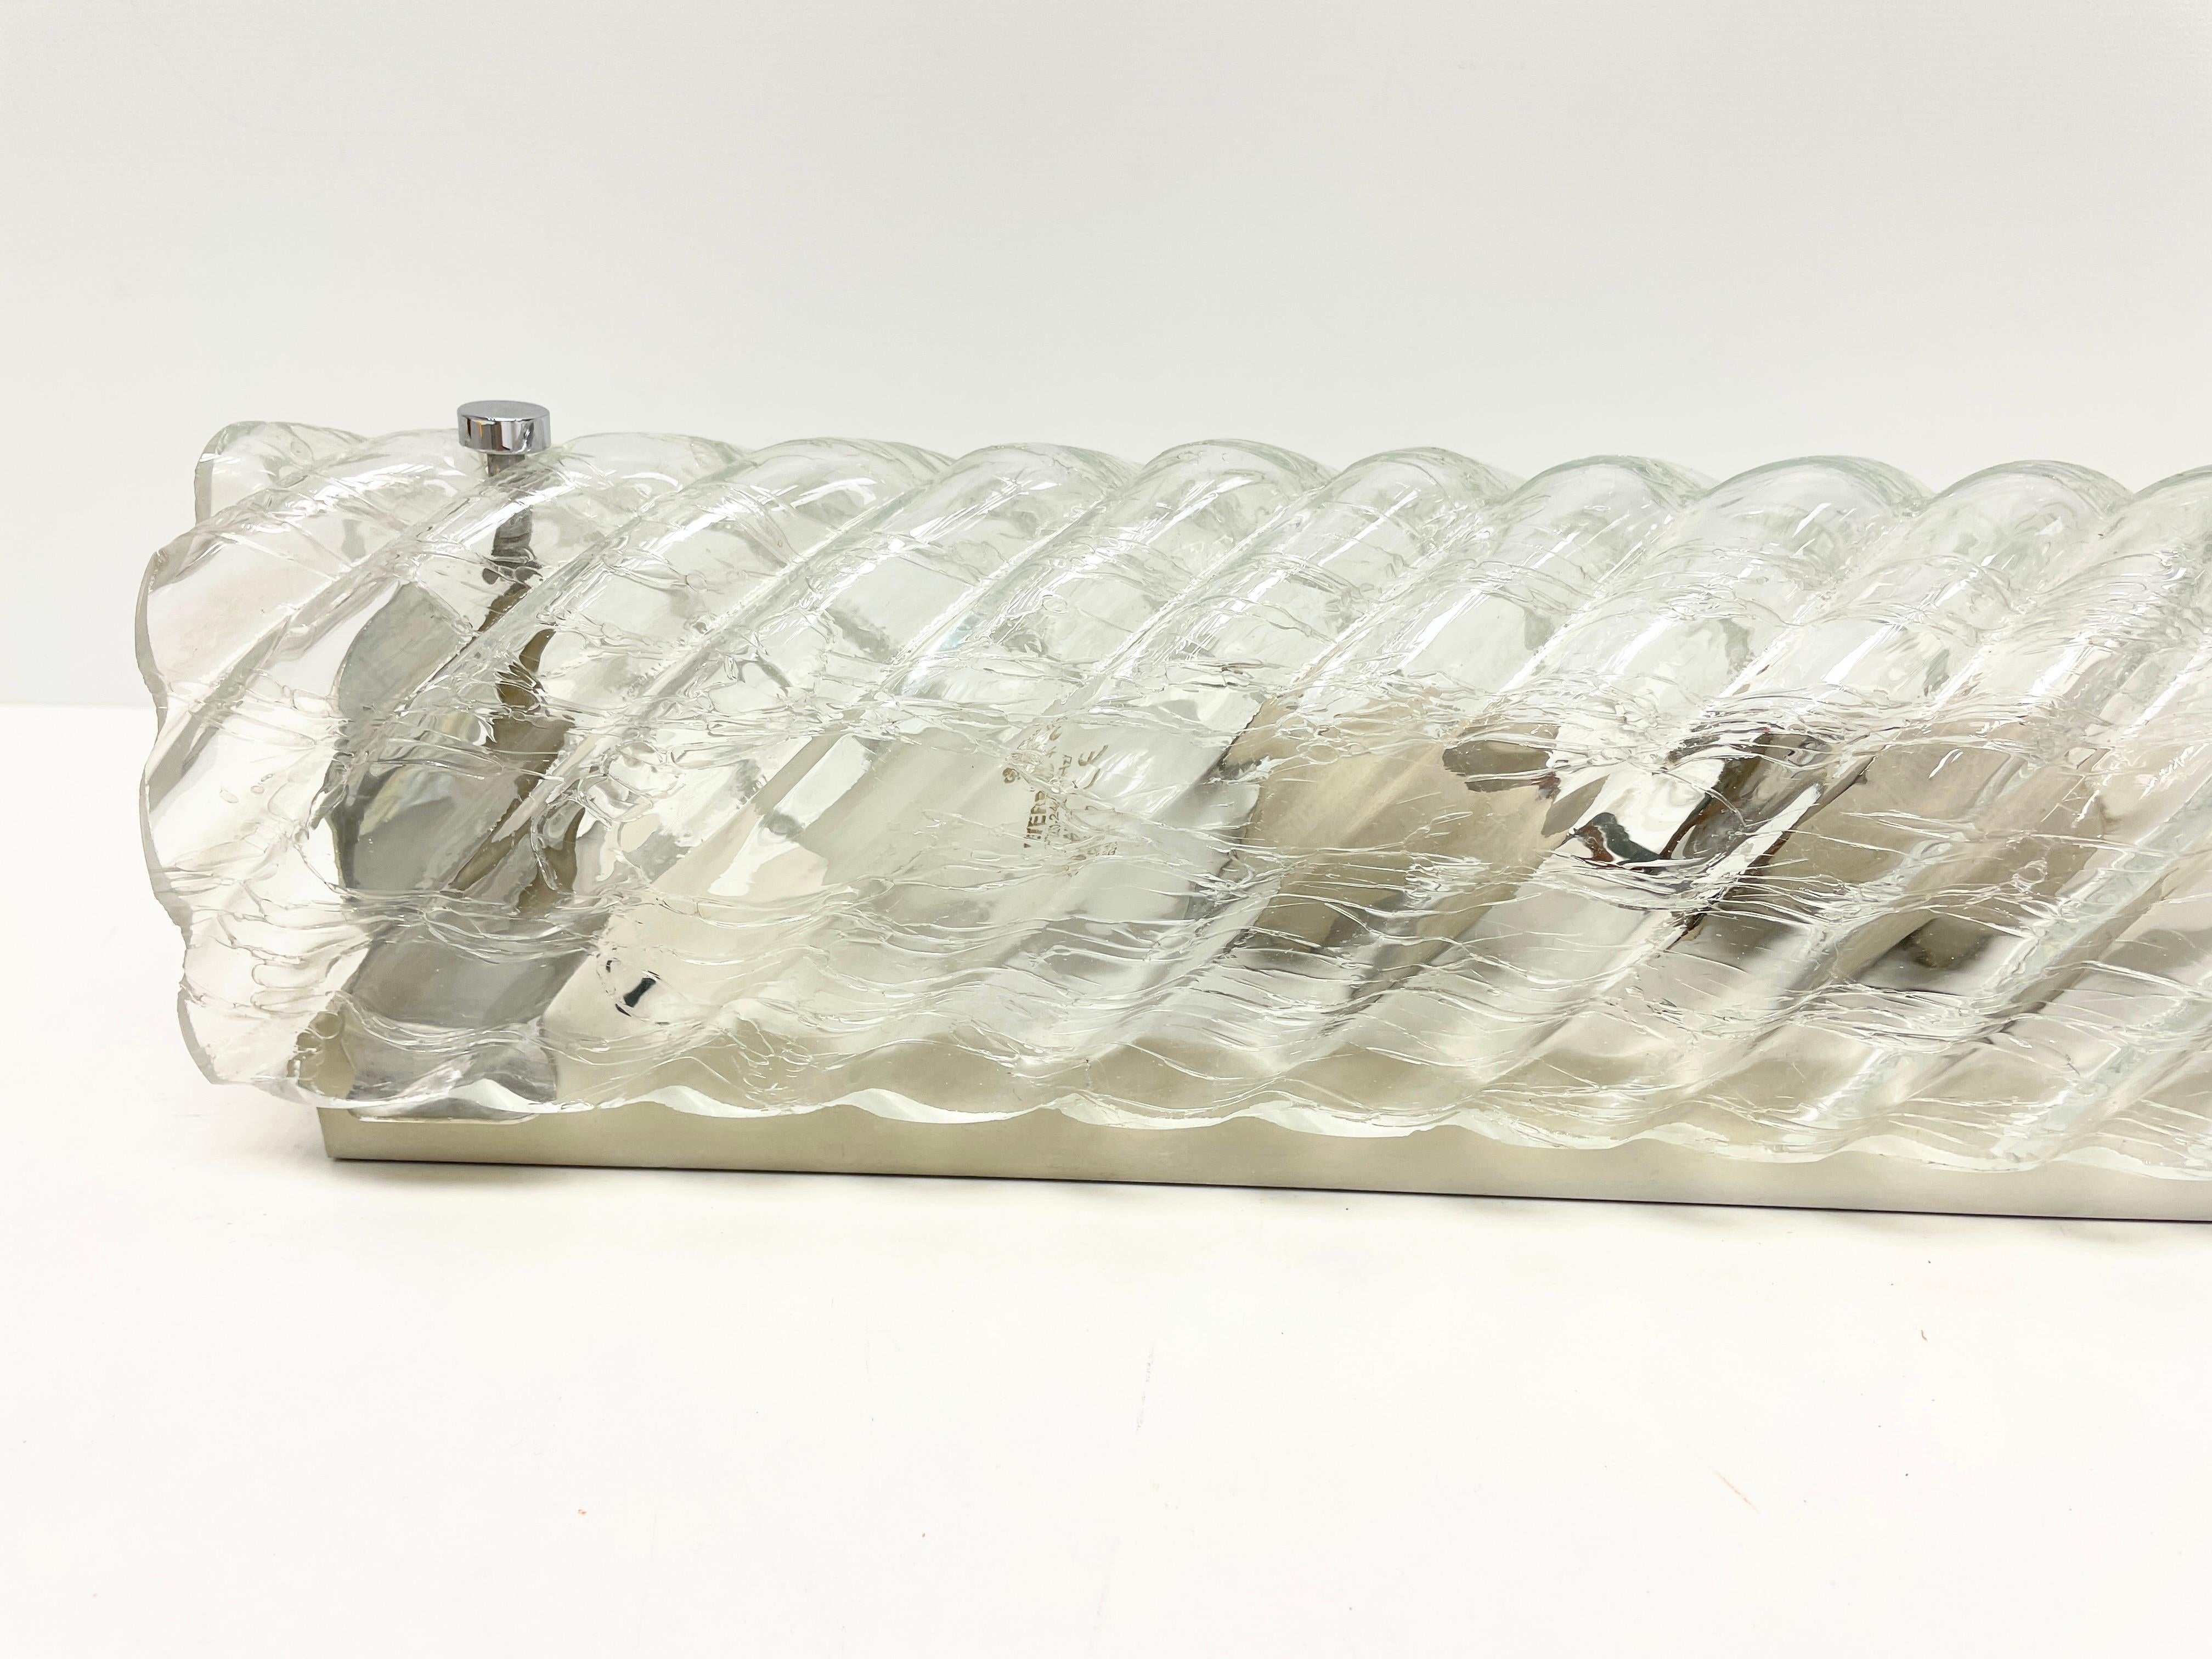 Two Light Swirl Glass Sconce by Doria Lights, Mid-Century Modern, Germany, 1960s For Sale 1